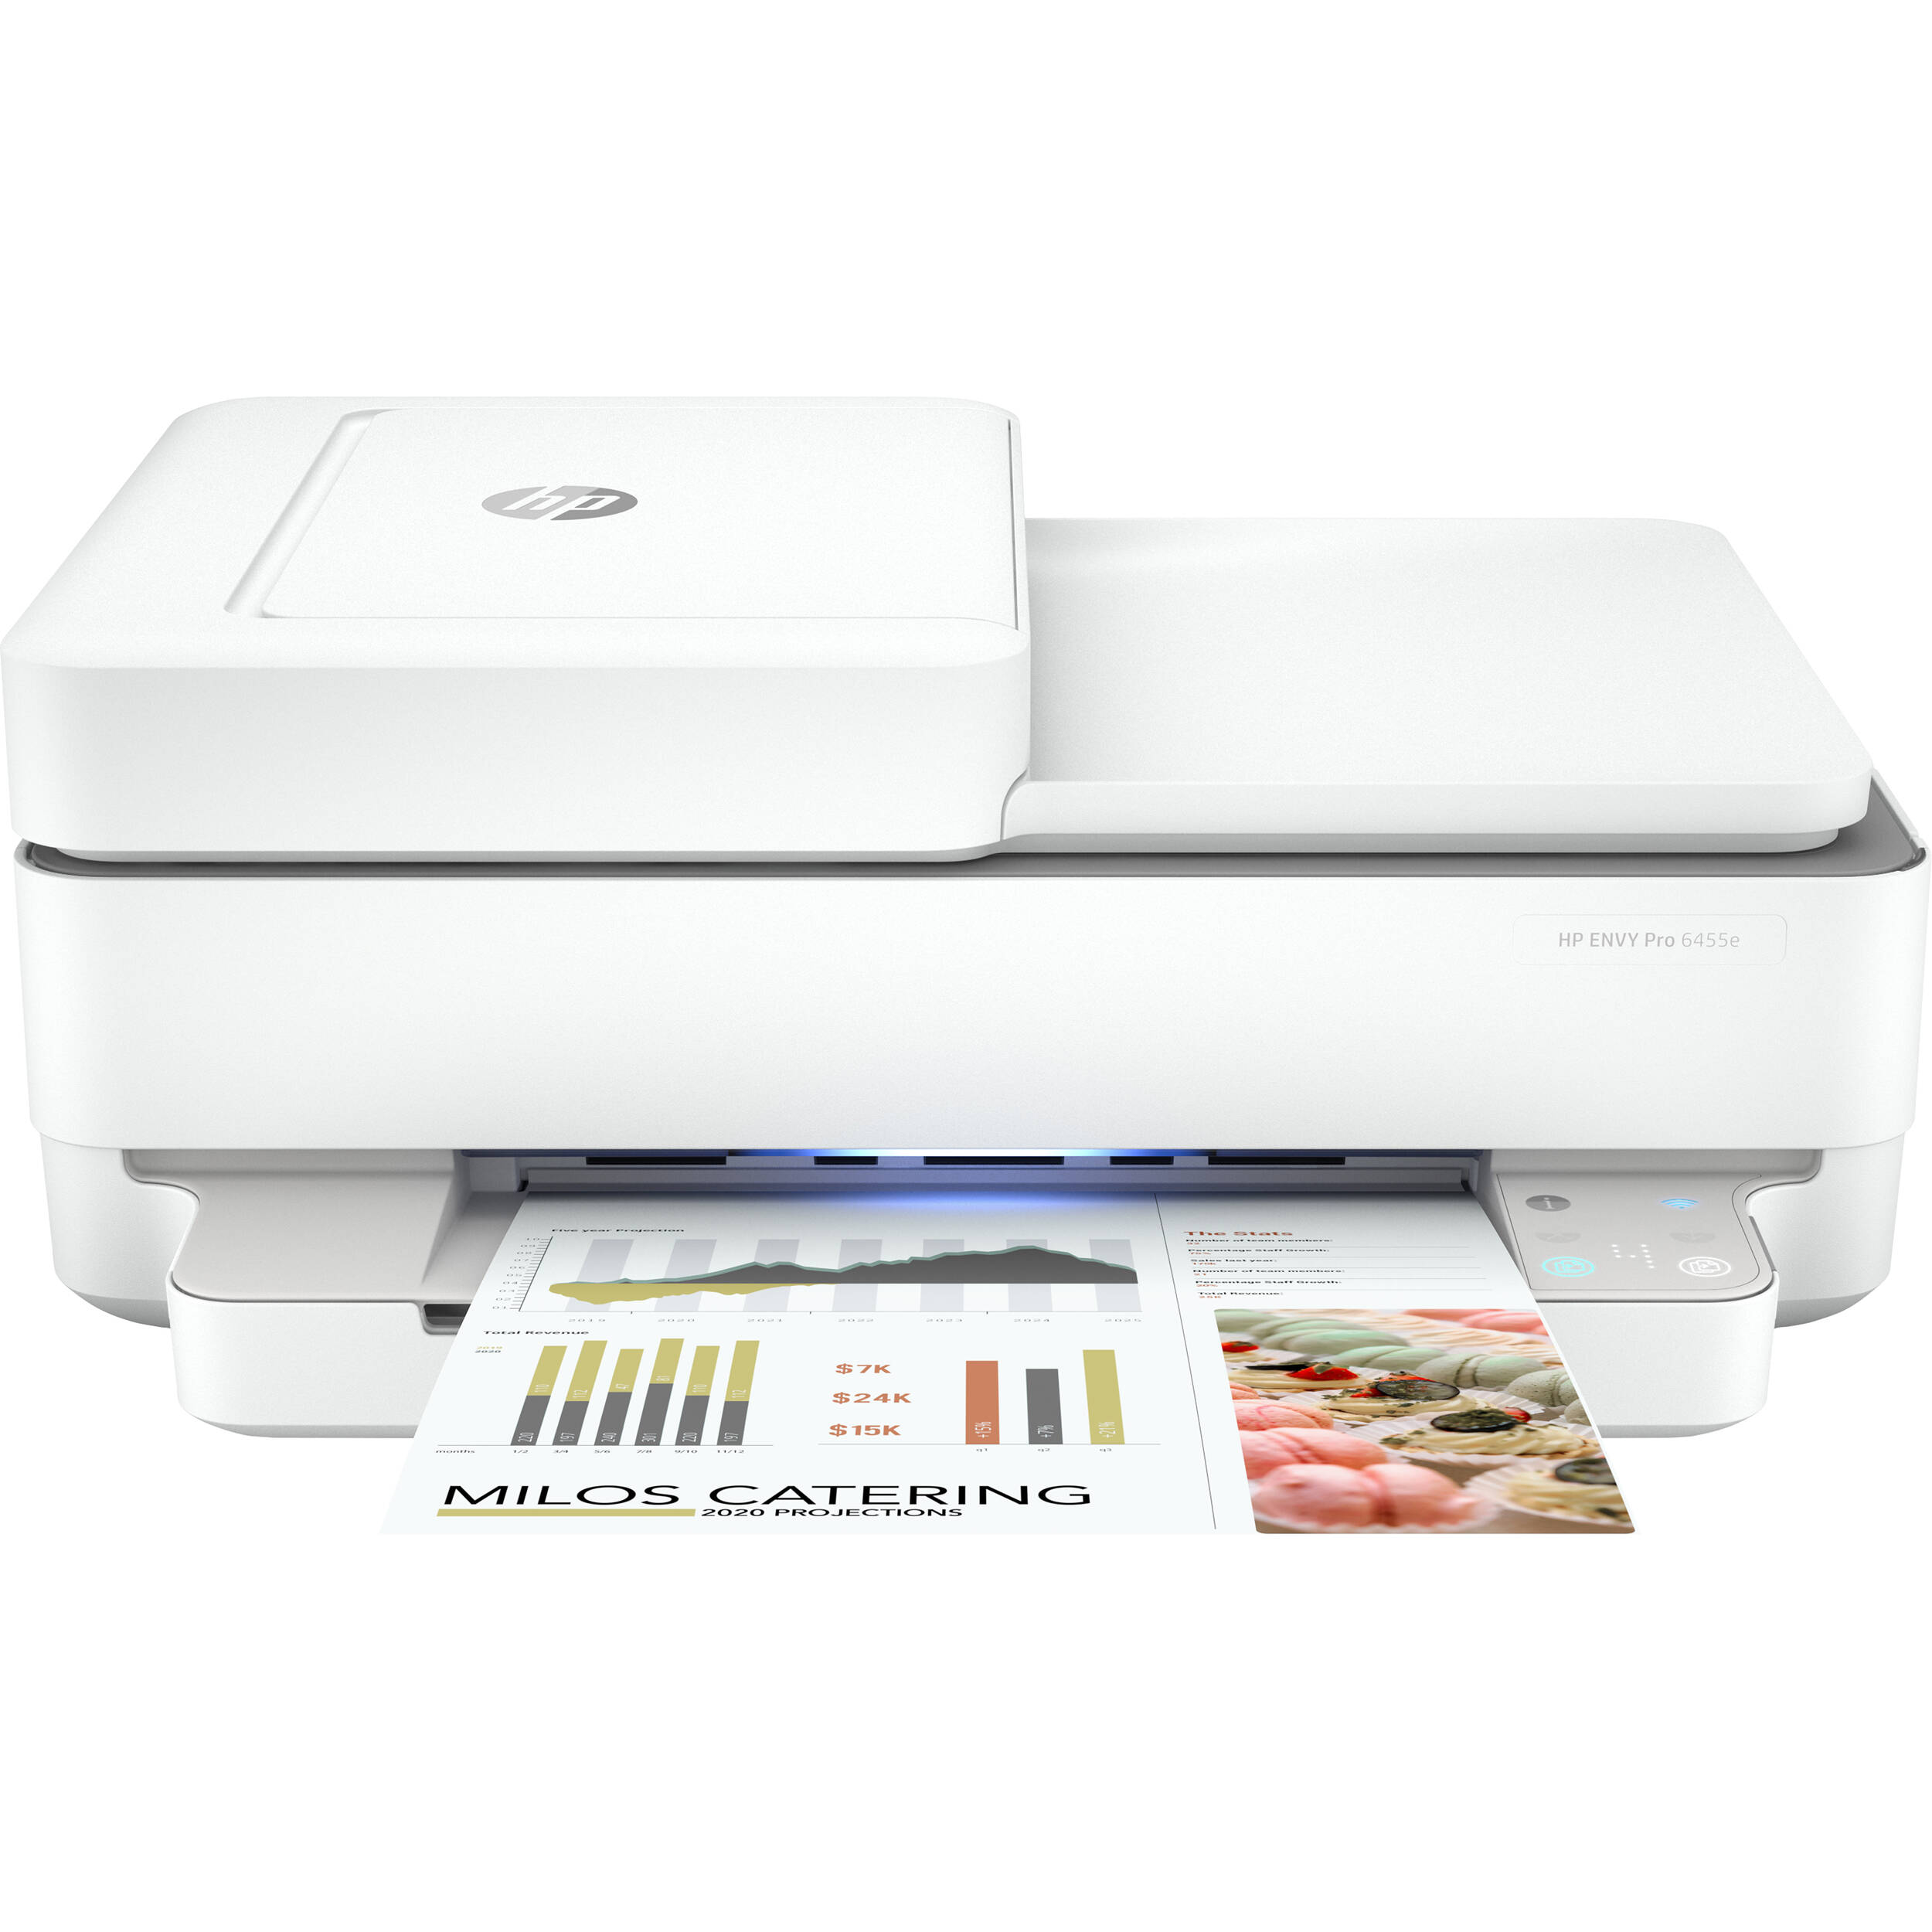 HP HP-ENVY6455E-RB ENVY Pro 6455e All-in-One Printer, White - Certified Refurbished